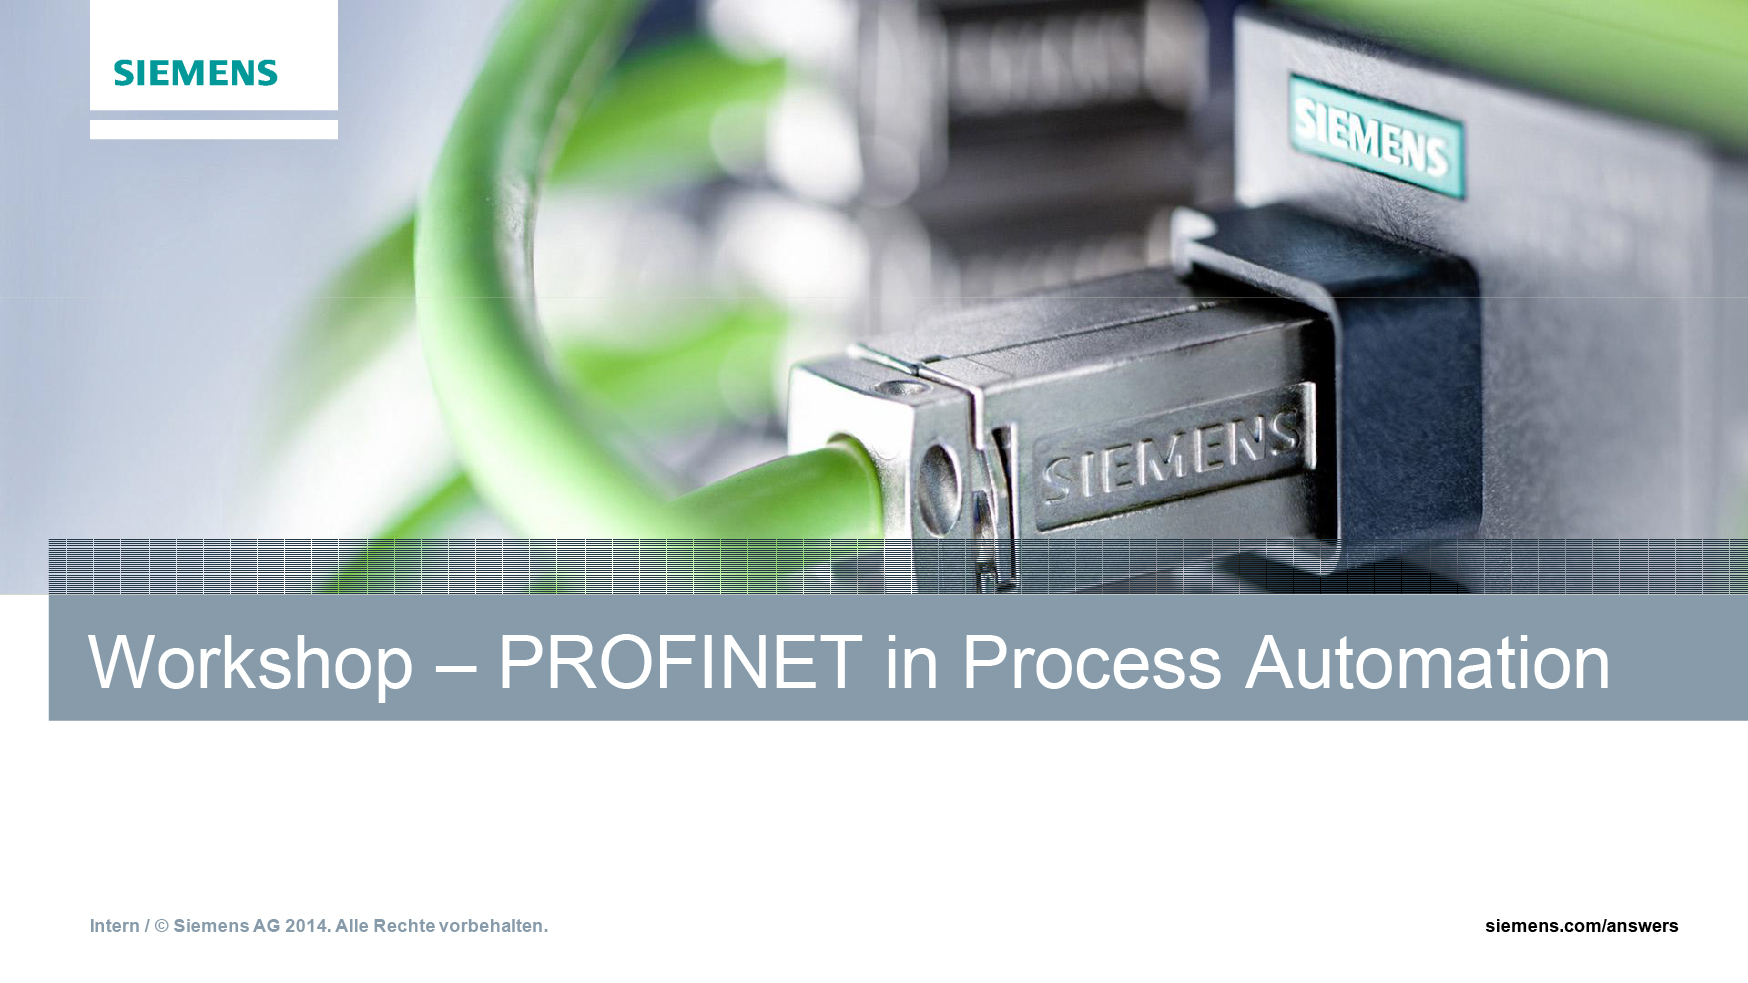 PROFINET in Process Automation